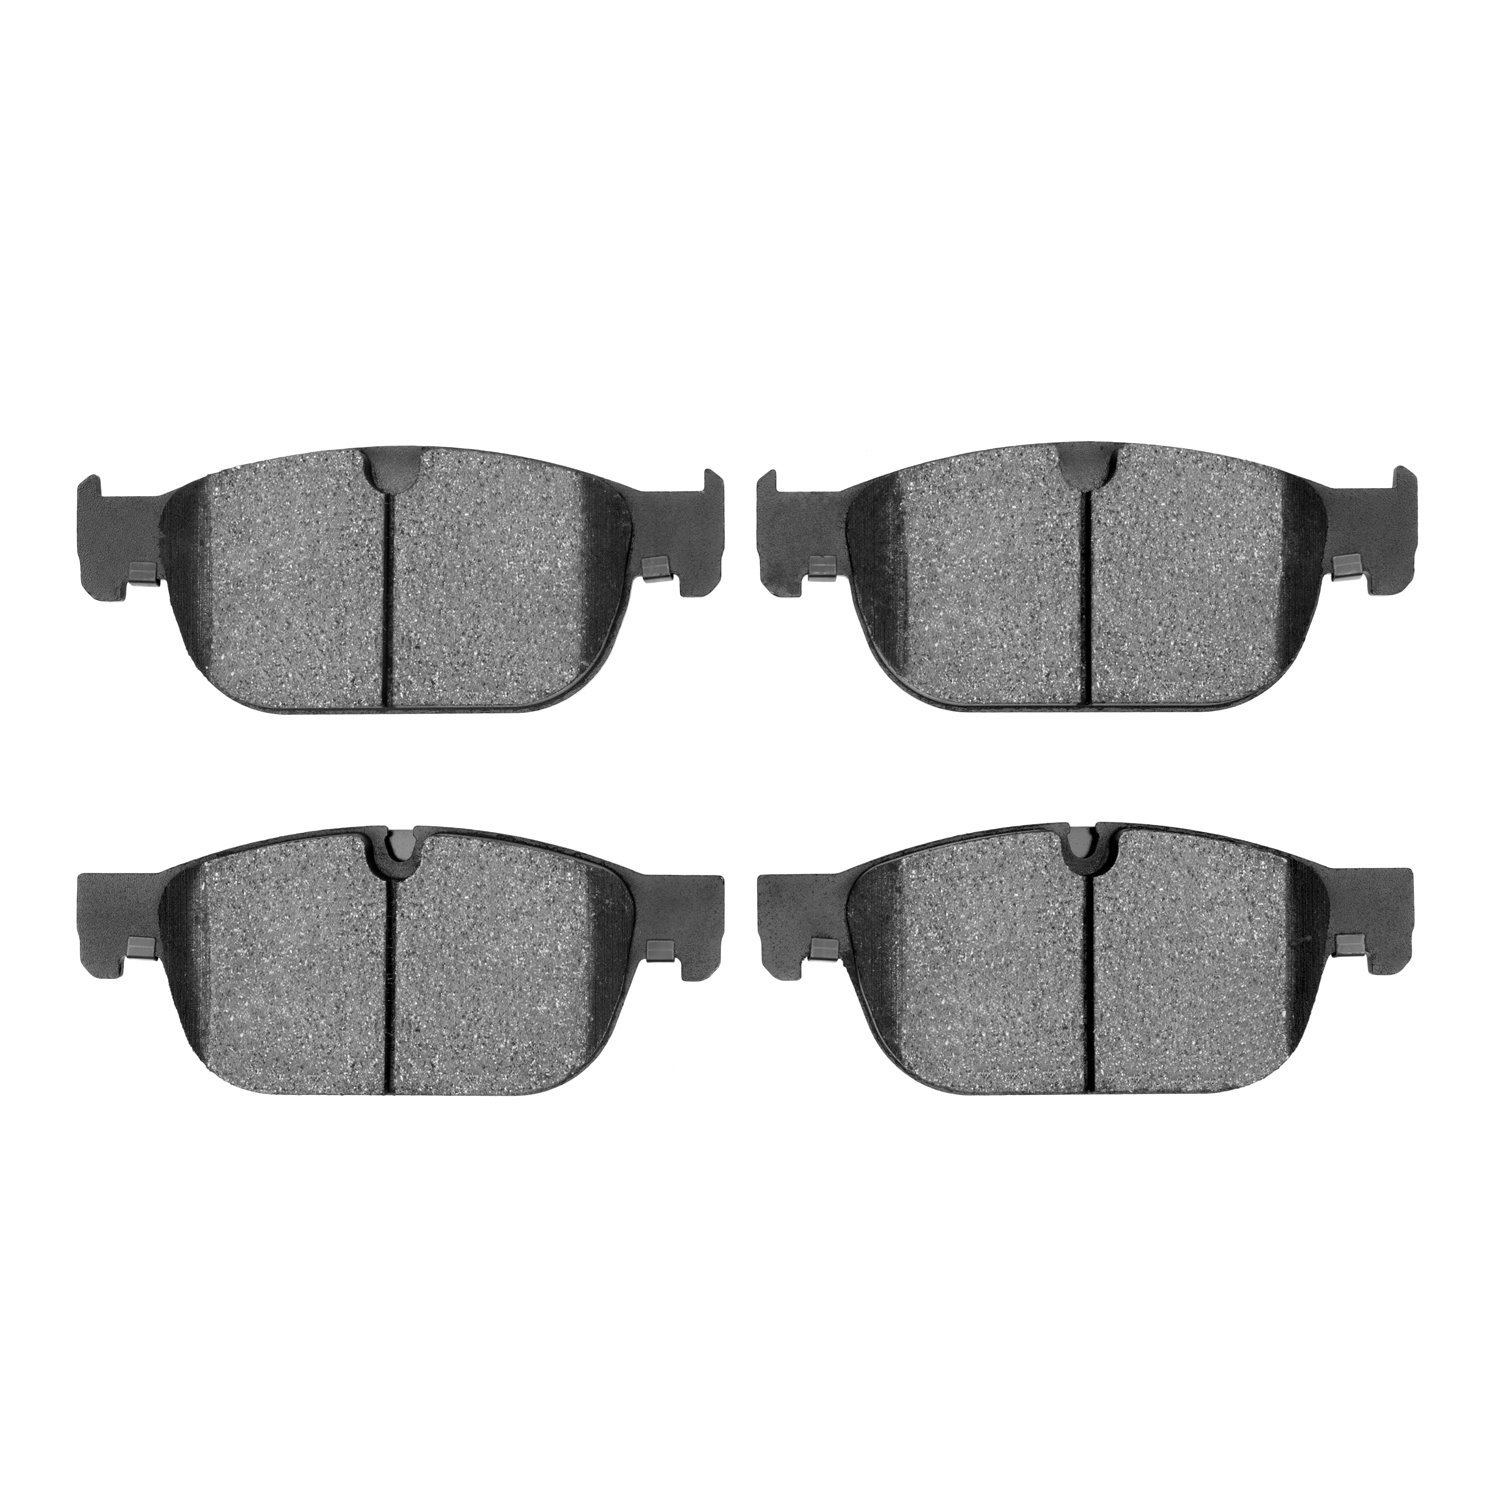 1000-1865-00 Track/Street Low-Metallic Brake Pads Kit, Fits Select Multiple Makes/Models, Position: Front